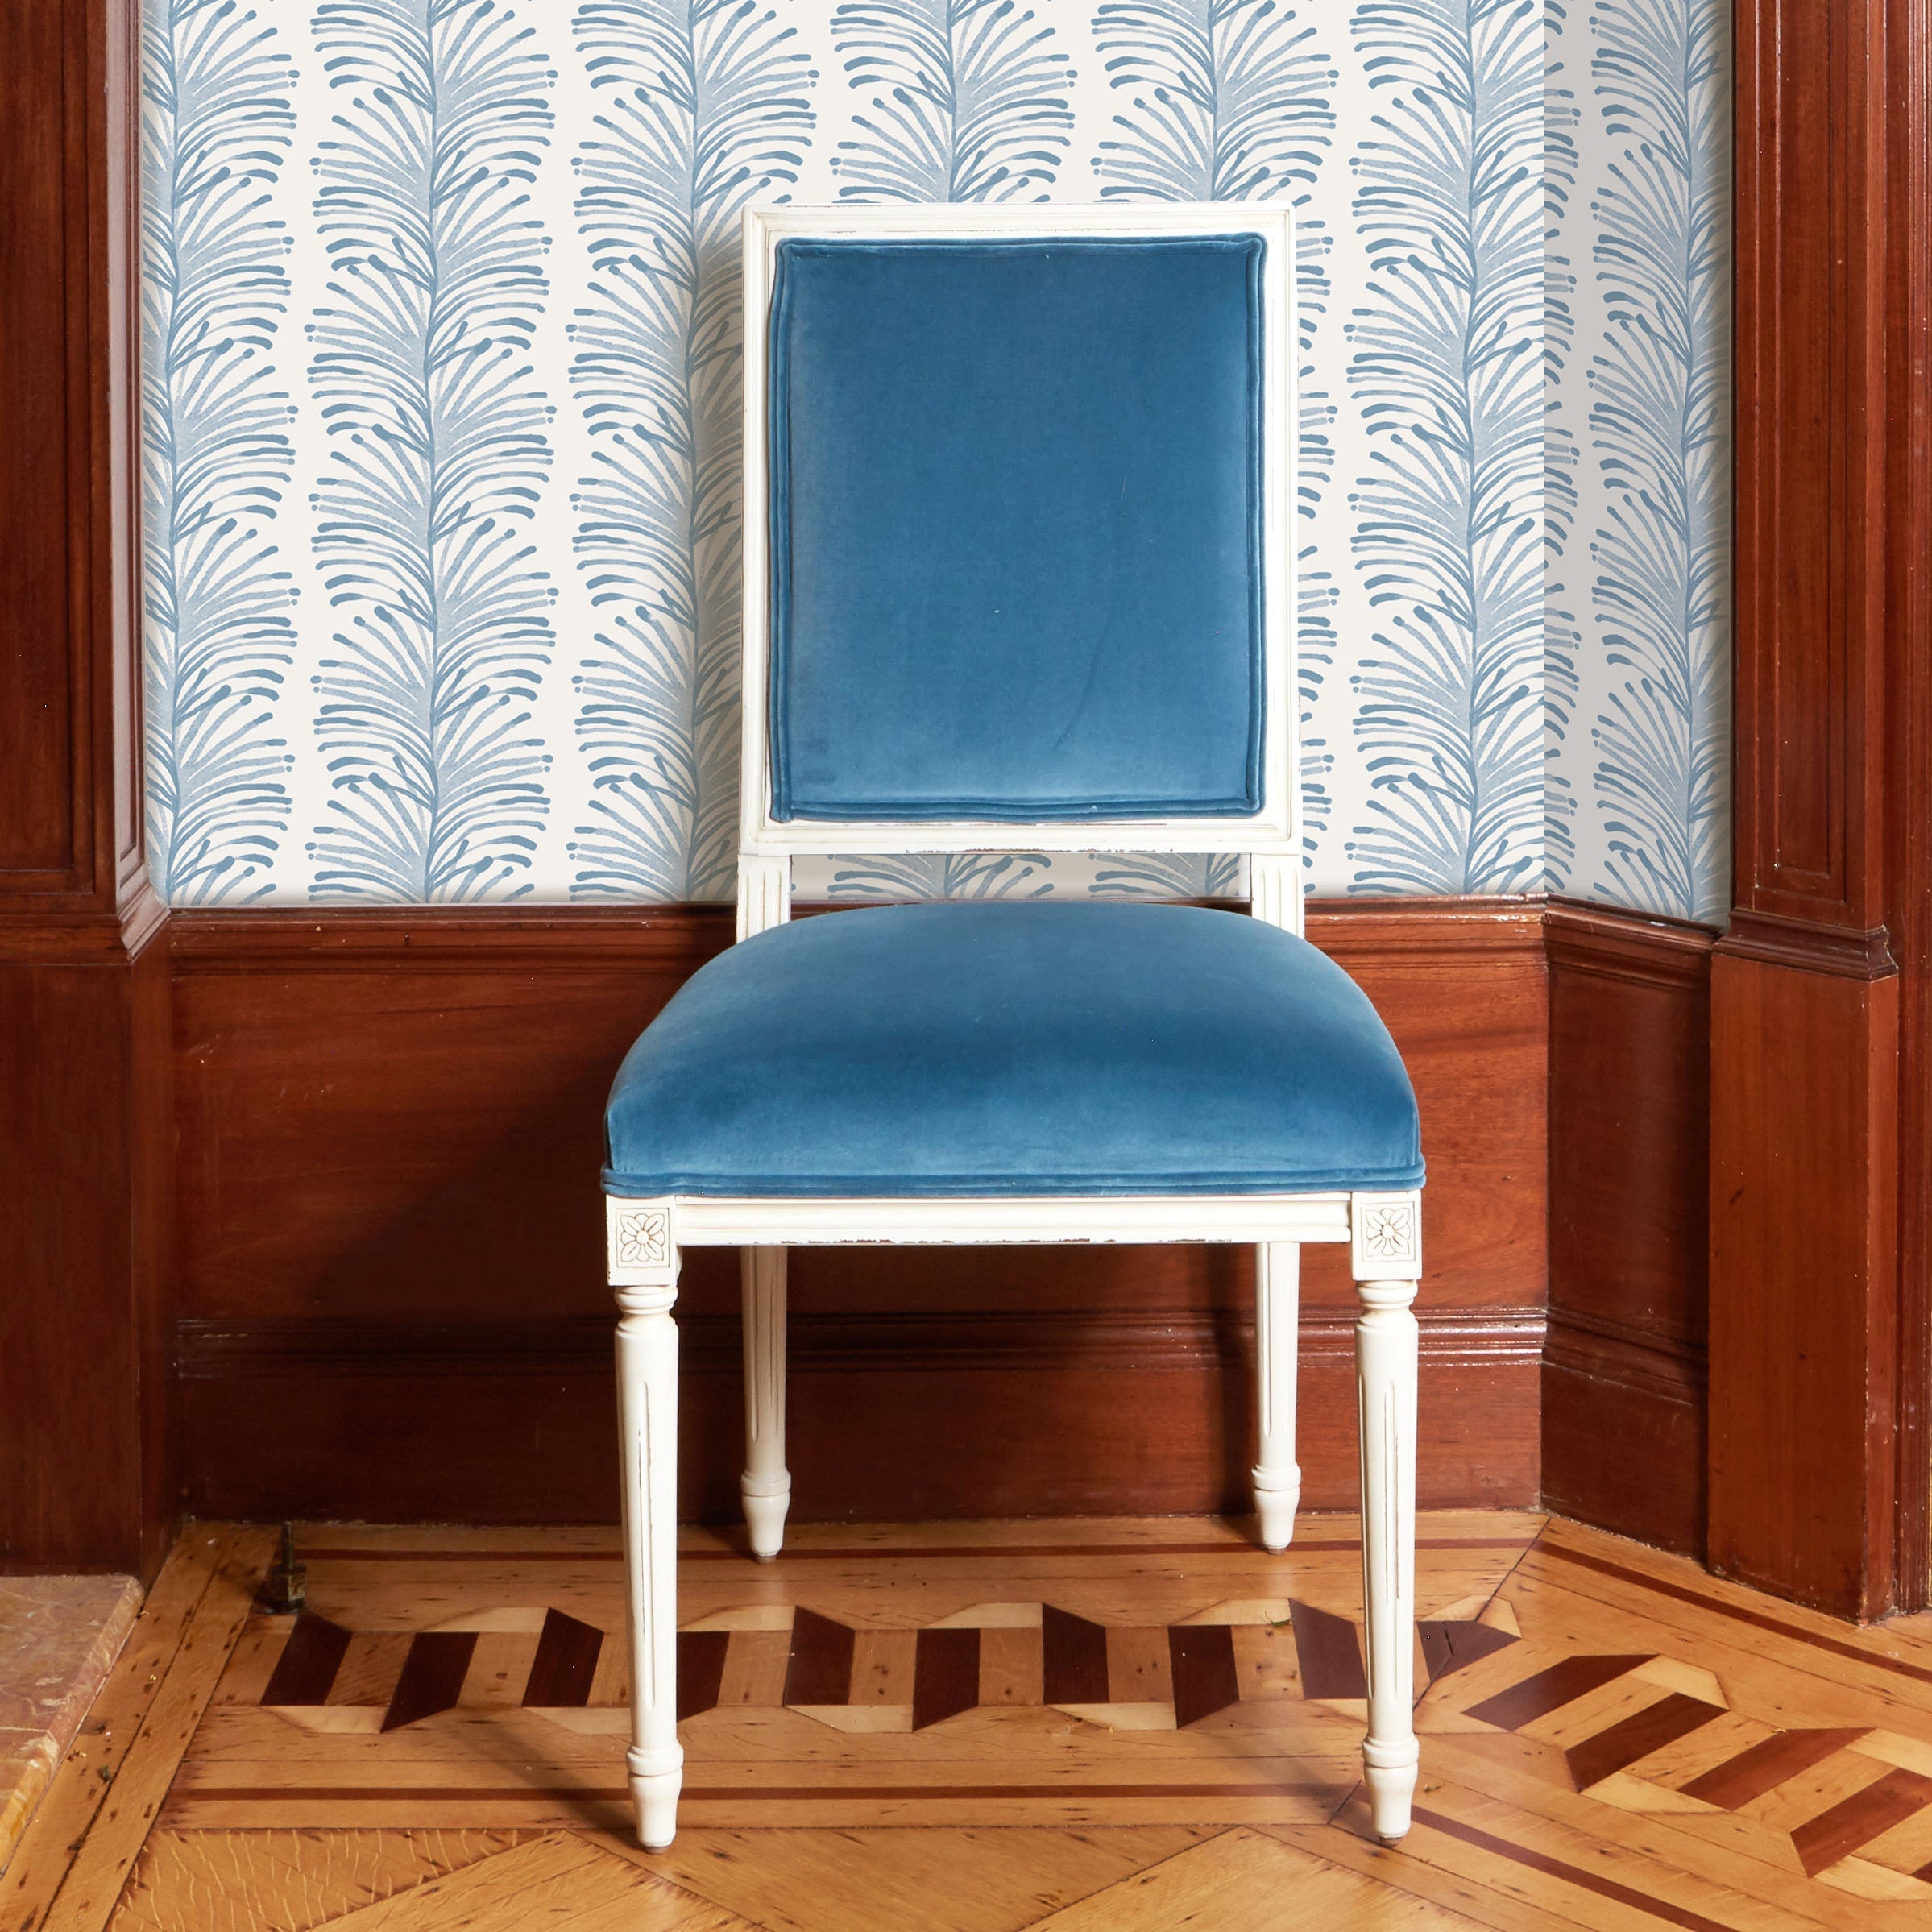 Corner styled with Sky Blue Botanical Stripe Printed Wallpaper and Blue Velvet white wooden chair in front